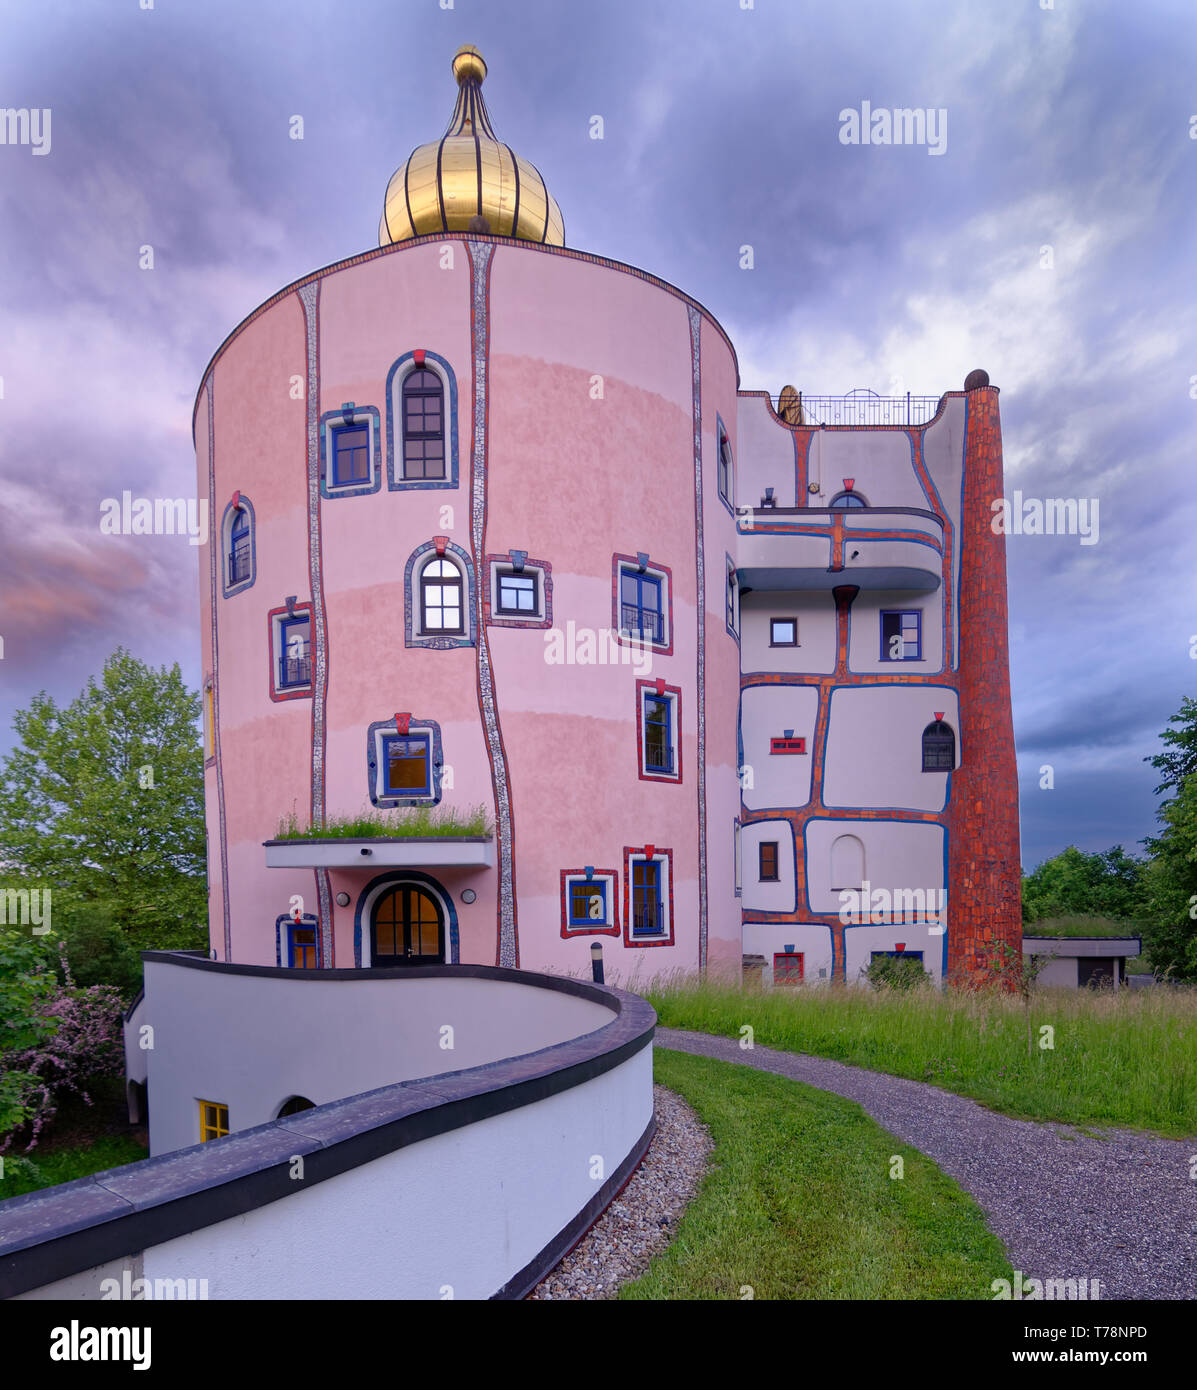 Looking up the path to the Stammhaus and its golden dome at Rogner Bad Blumau, Austria, a resort or spa hotel designed by Friedensreich Hundertwasser Stock Photo